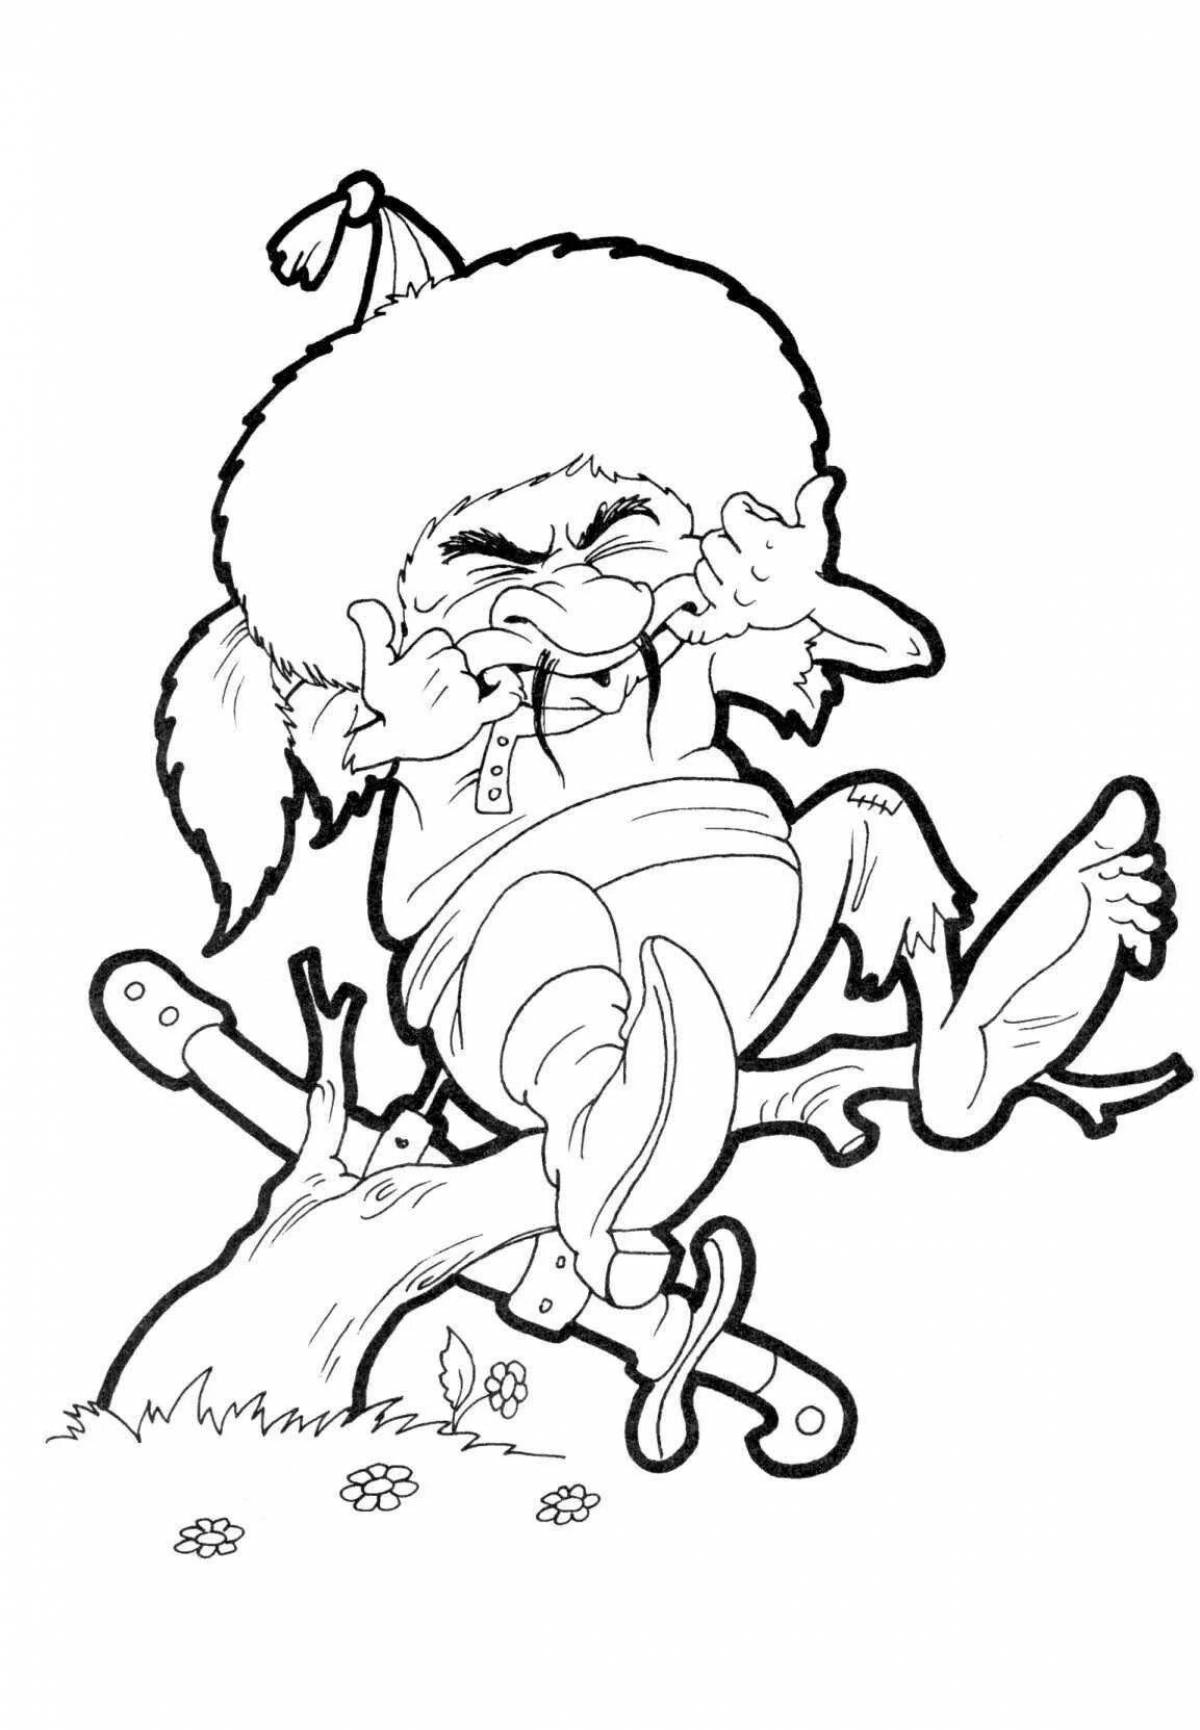 Animated goblin coloring page for kids